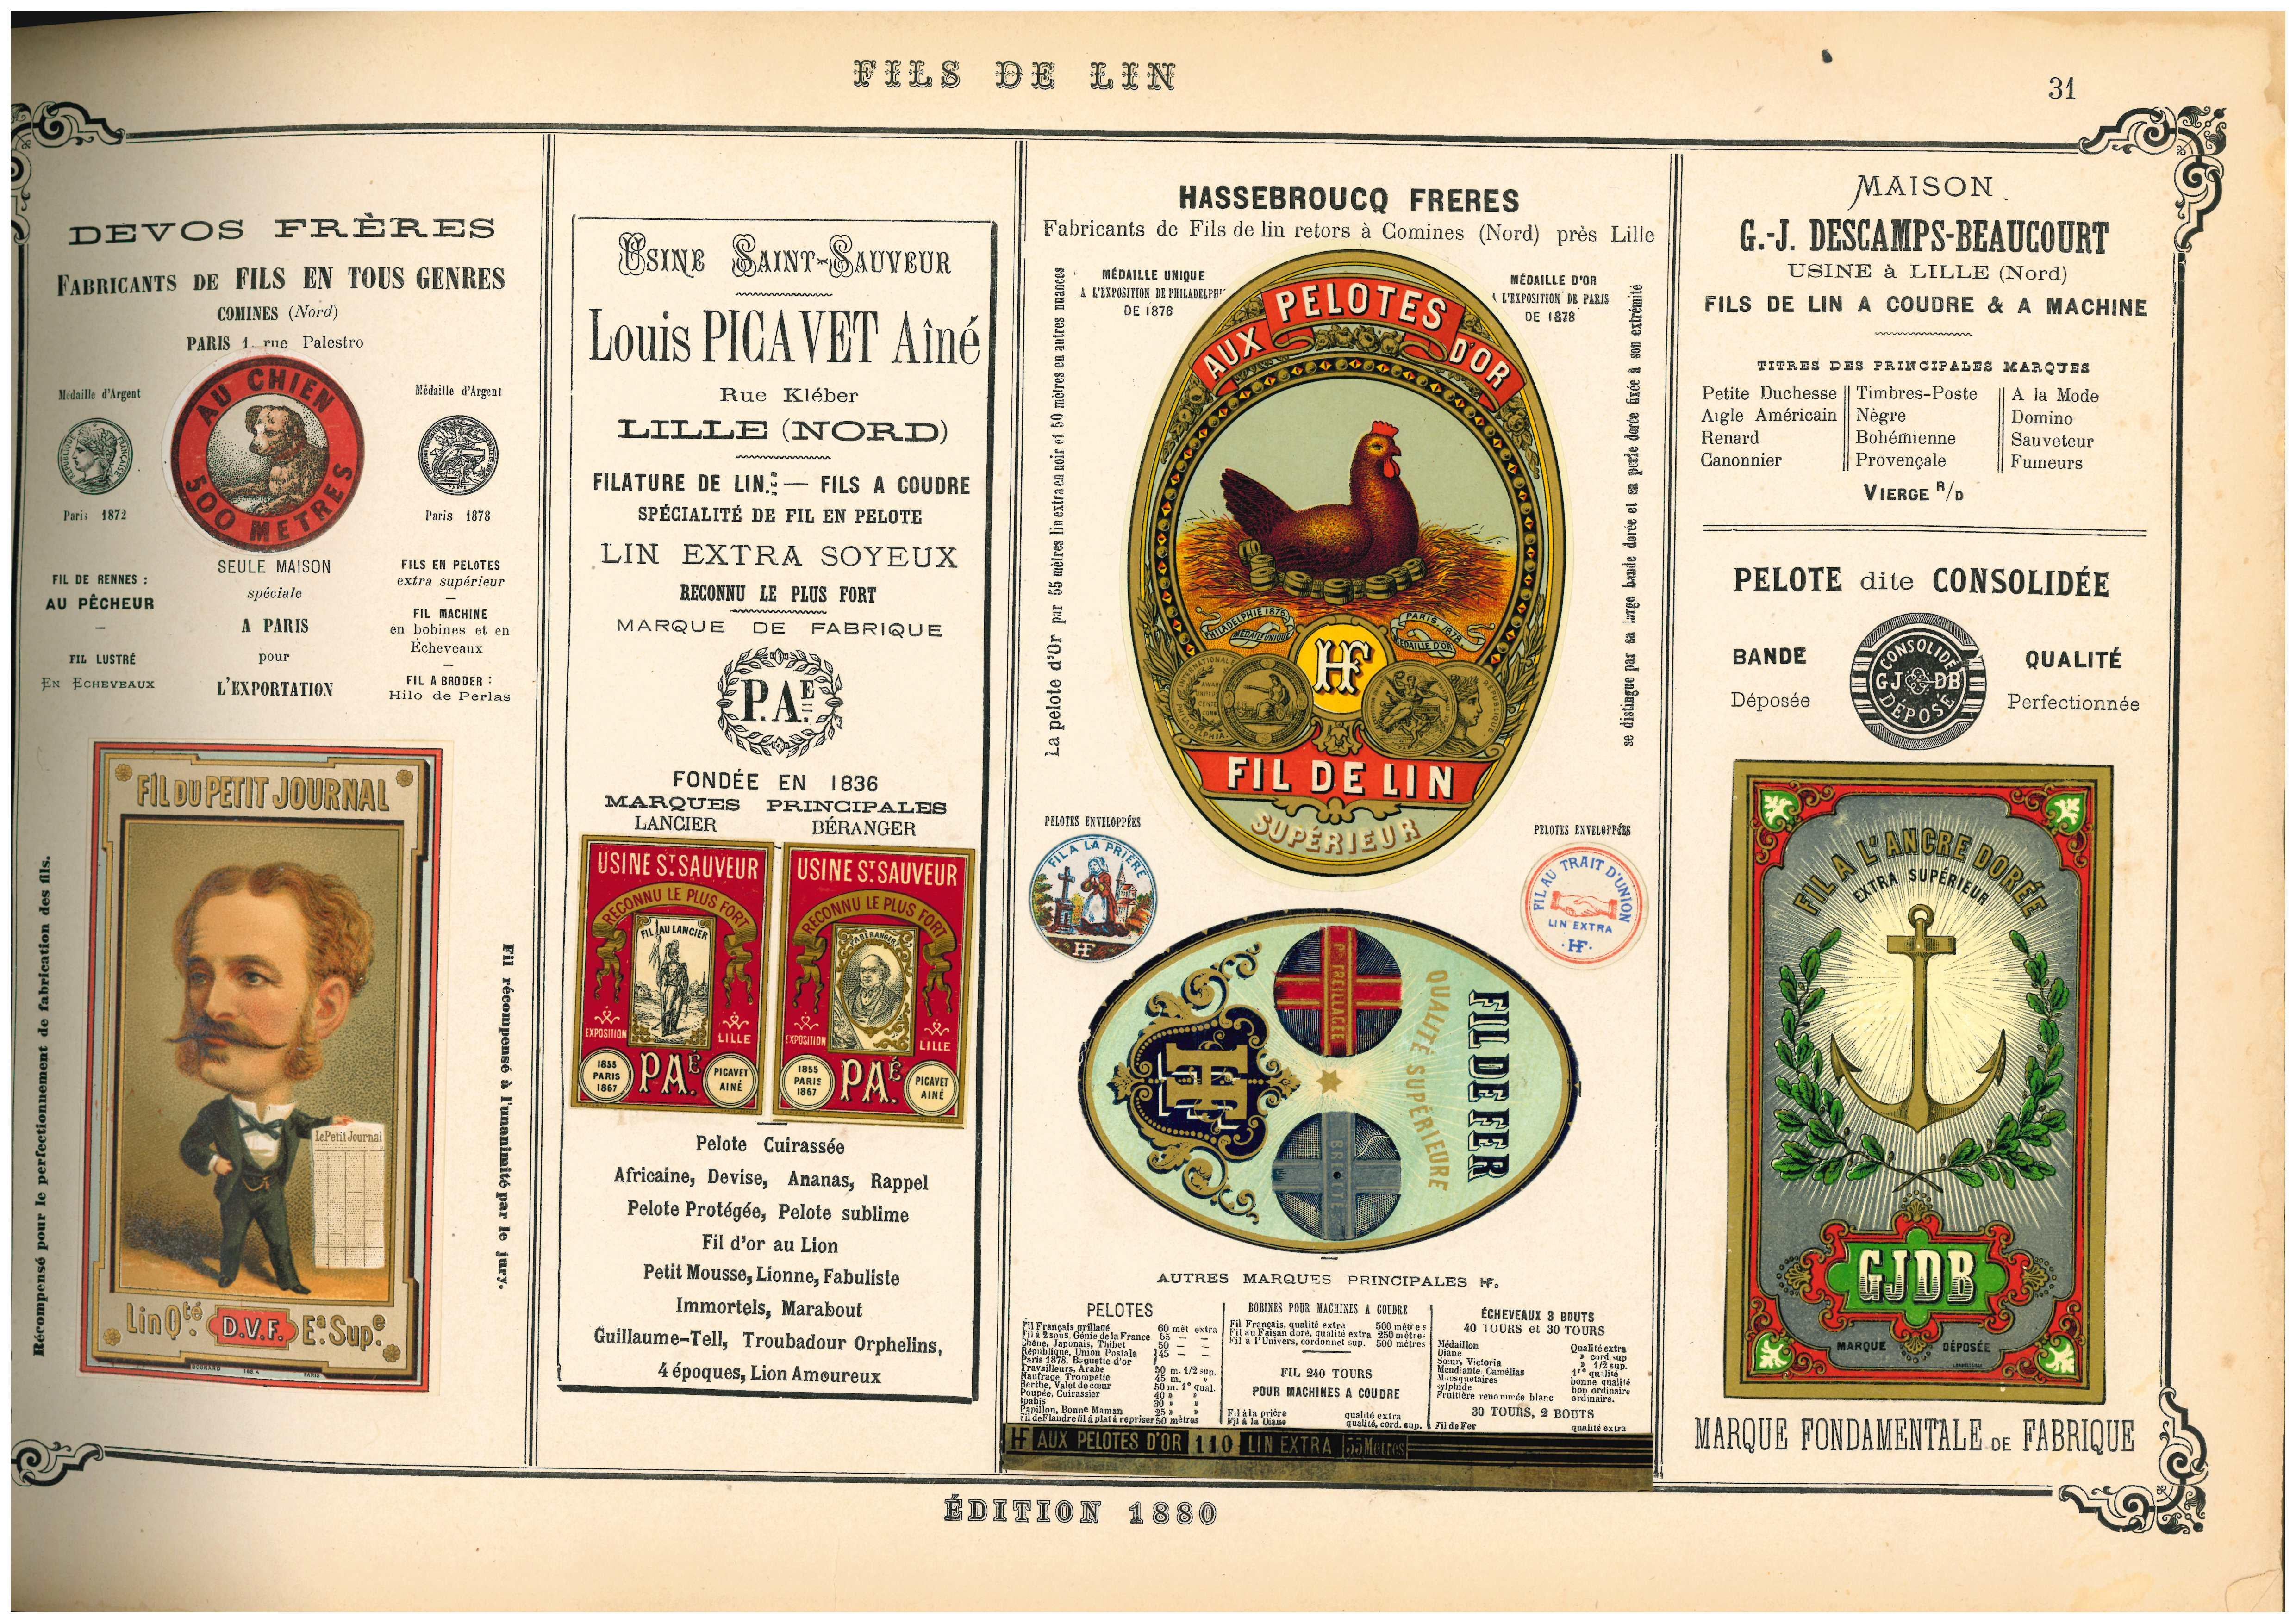 A beautiful book from 1880 with 183 pages to show varying French product labels. It is divided into five sections - the first four are the vast majority of the book and consist of household items and products: Fabrics, Products for the house, food